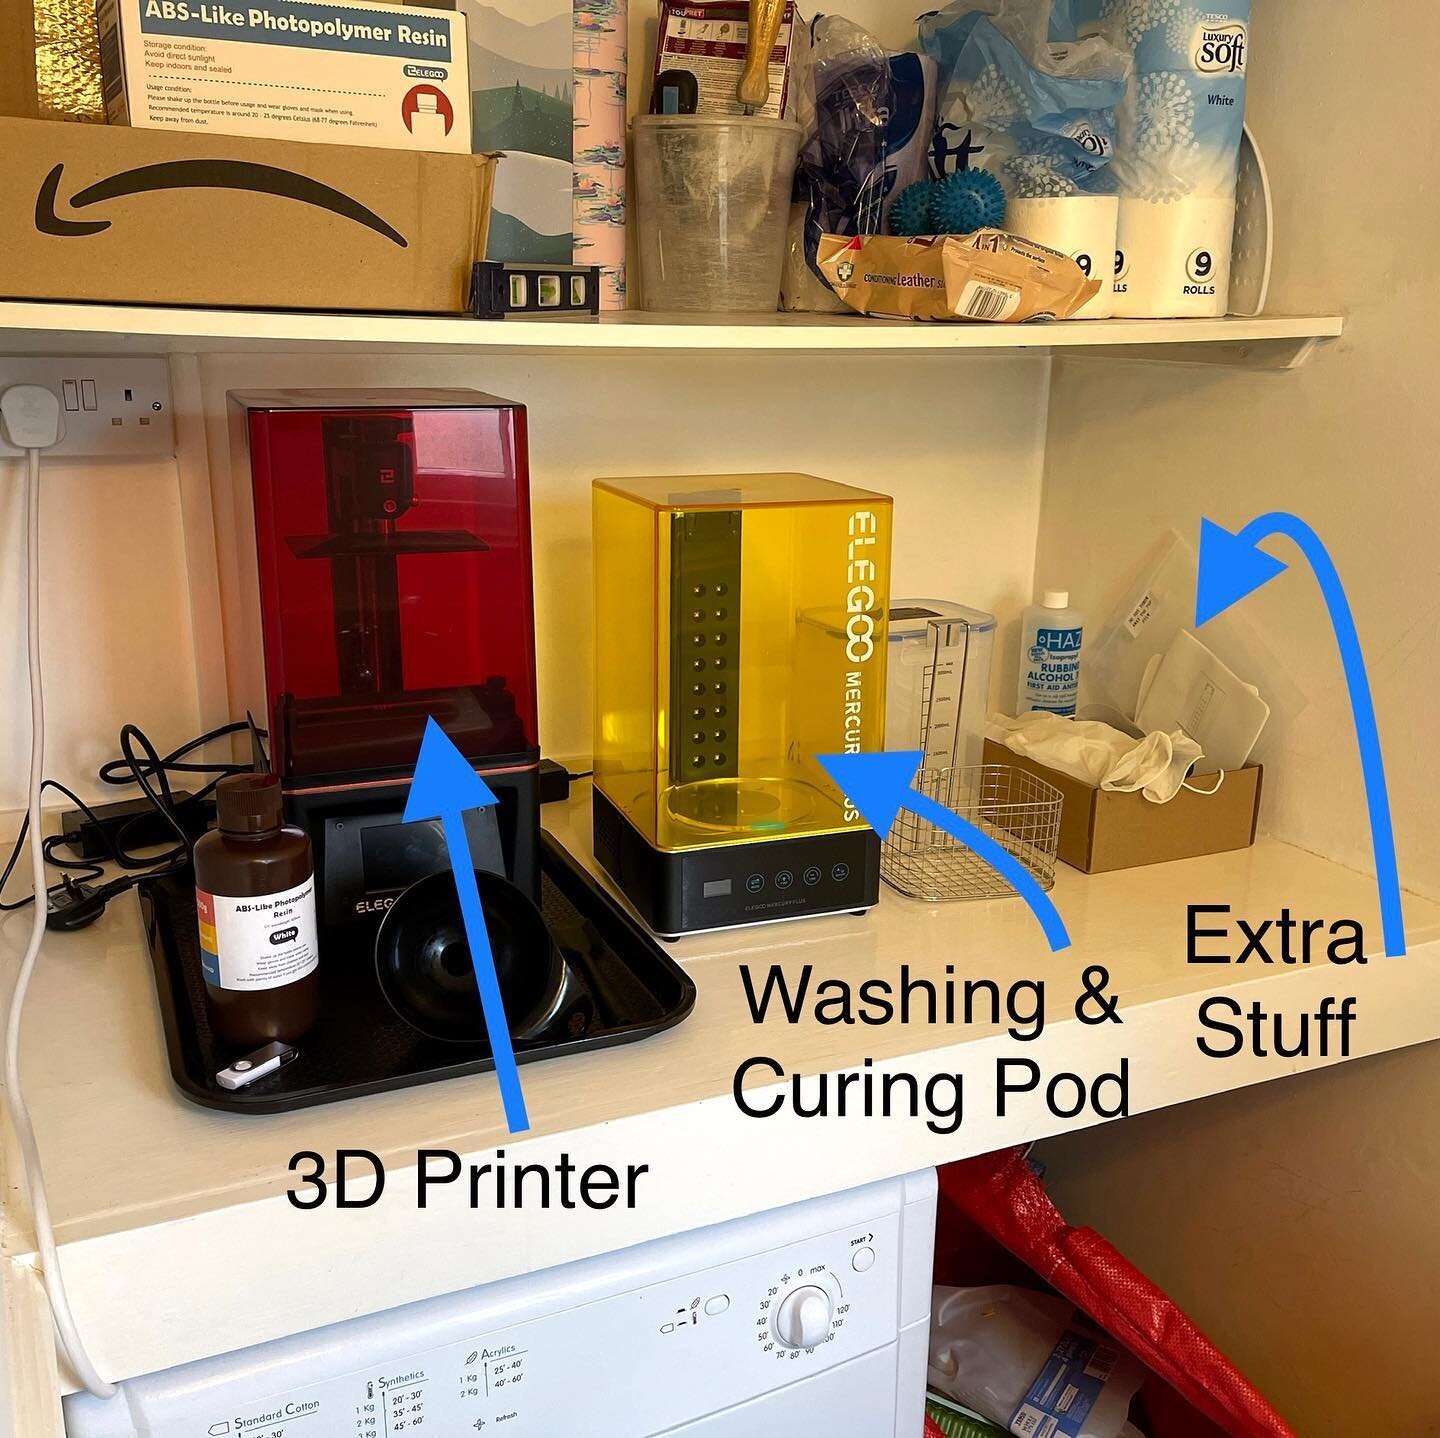 Here&rsquo;s the final setup, all fits on one shelf in the downstairs cloakroom 😆👍🏻 
Here&rsquo;s the link to the 3D printer if you want to check out the spec (let me know if you want any other info)🤓

https://amzn.to/3cwLLOB

#elegoomars2pro #el